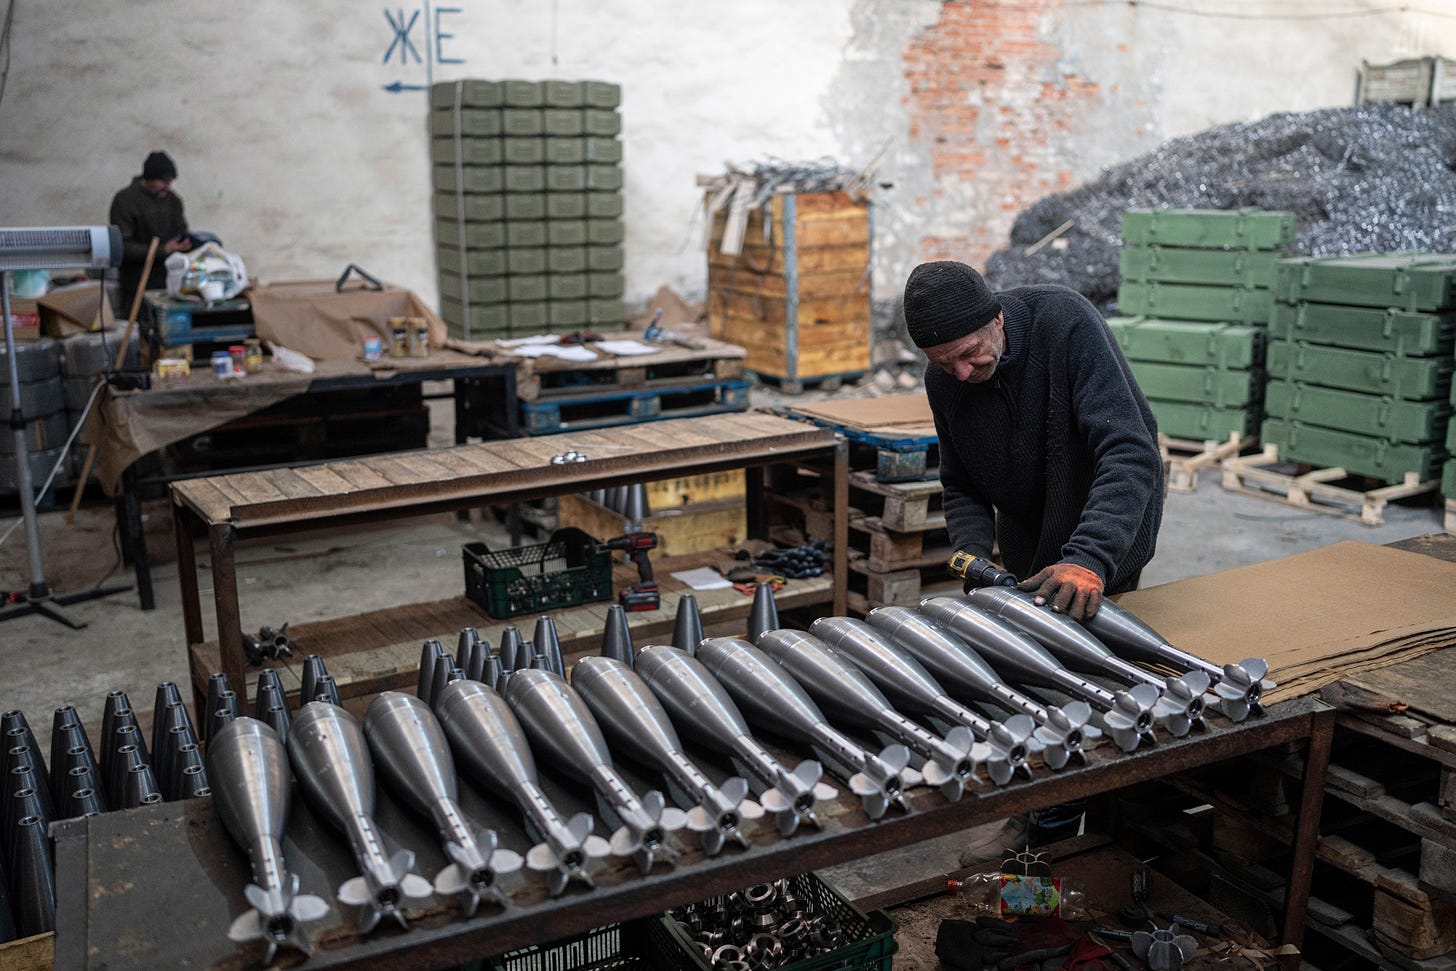 A worker assembles mortar shells at a factory in Ukraine.